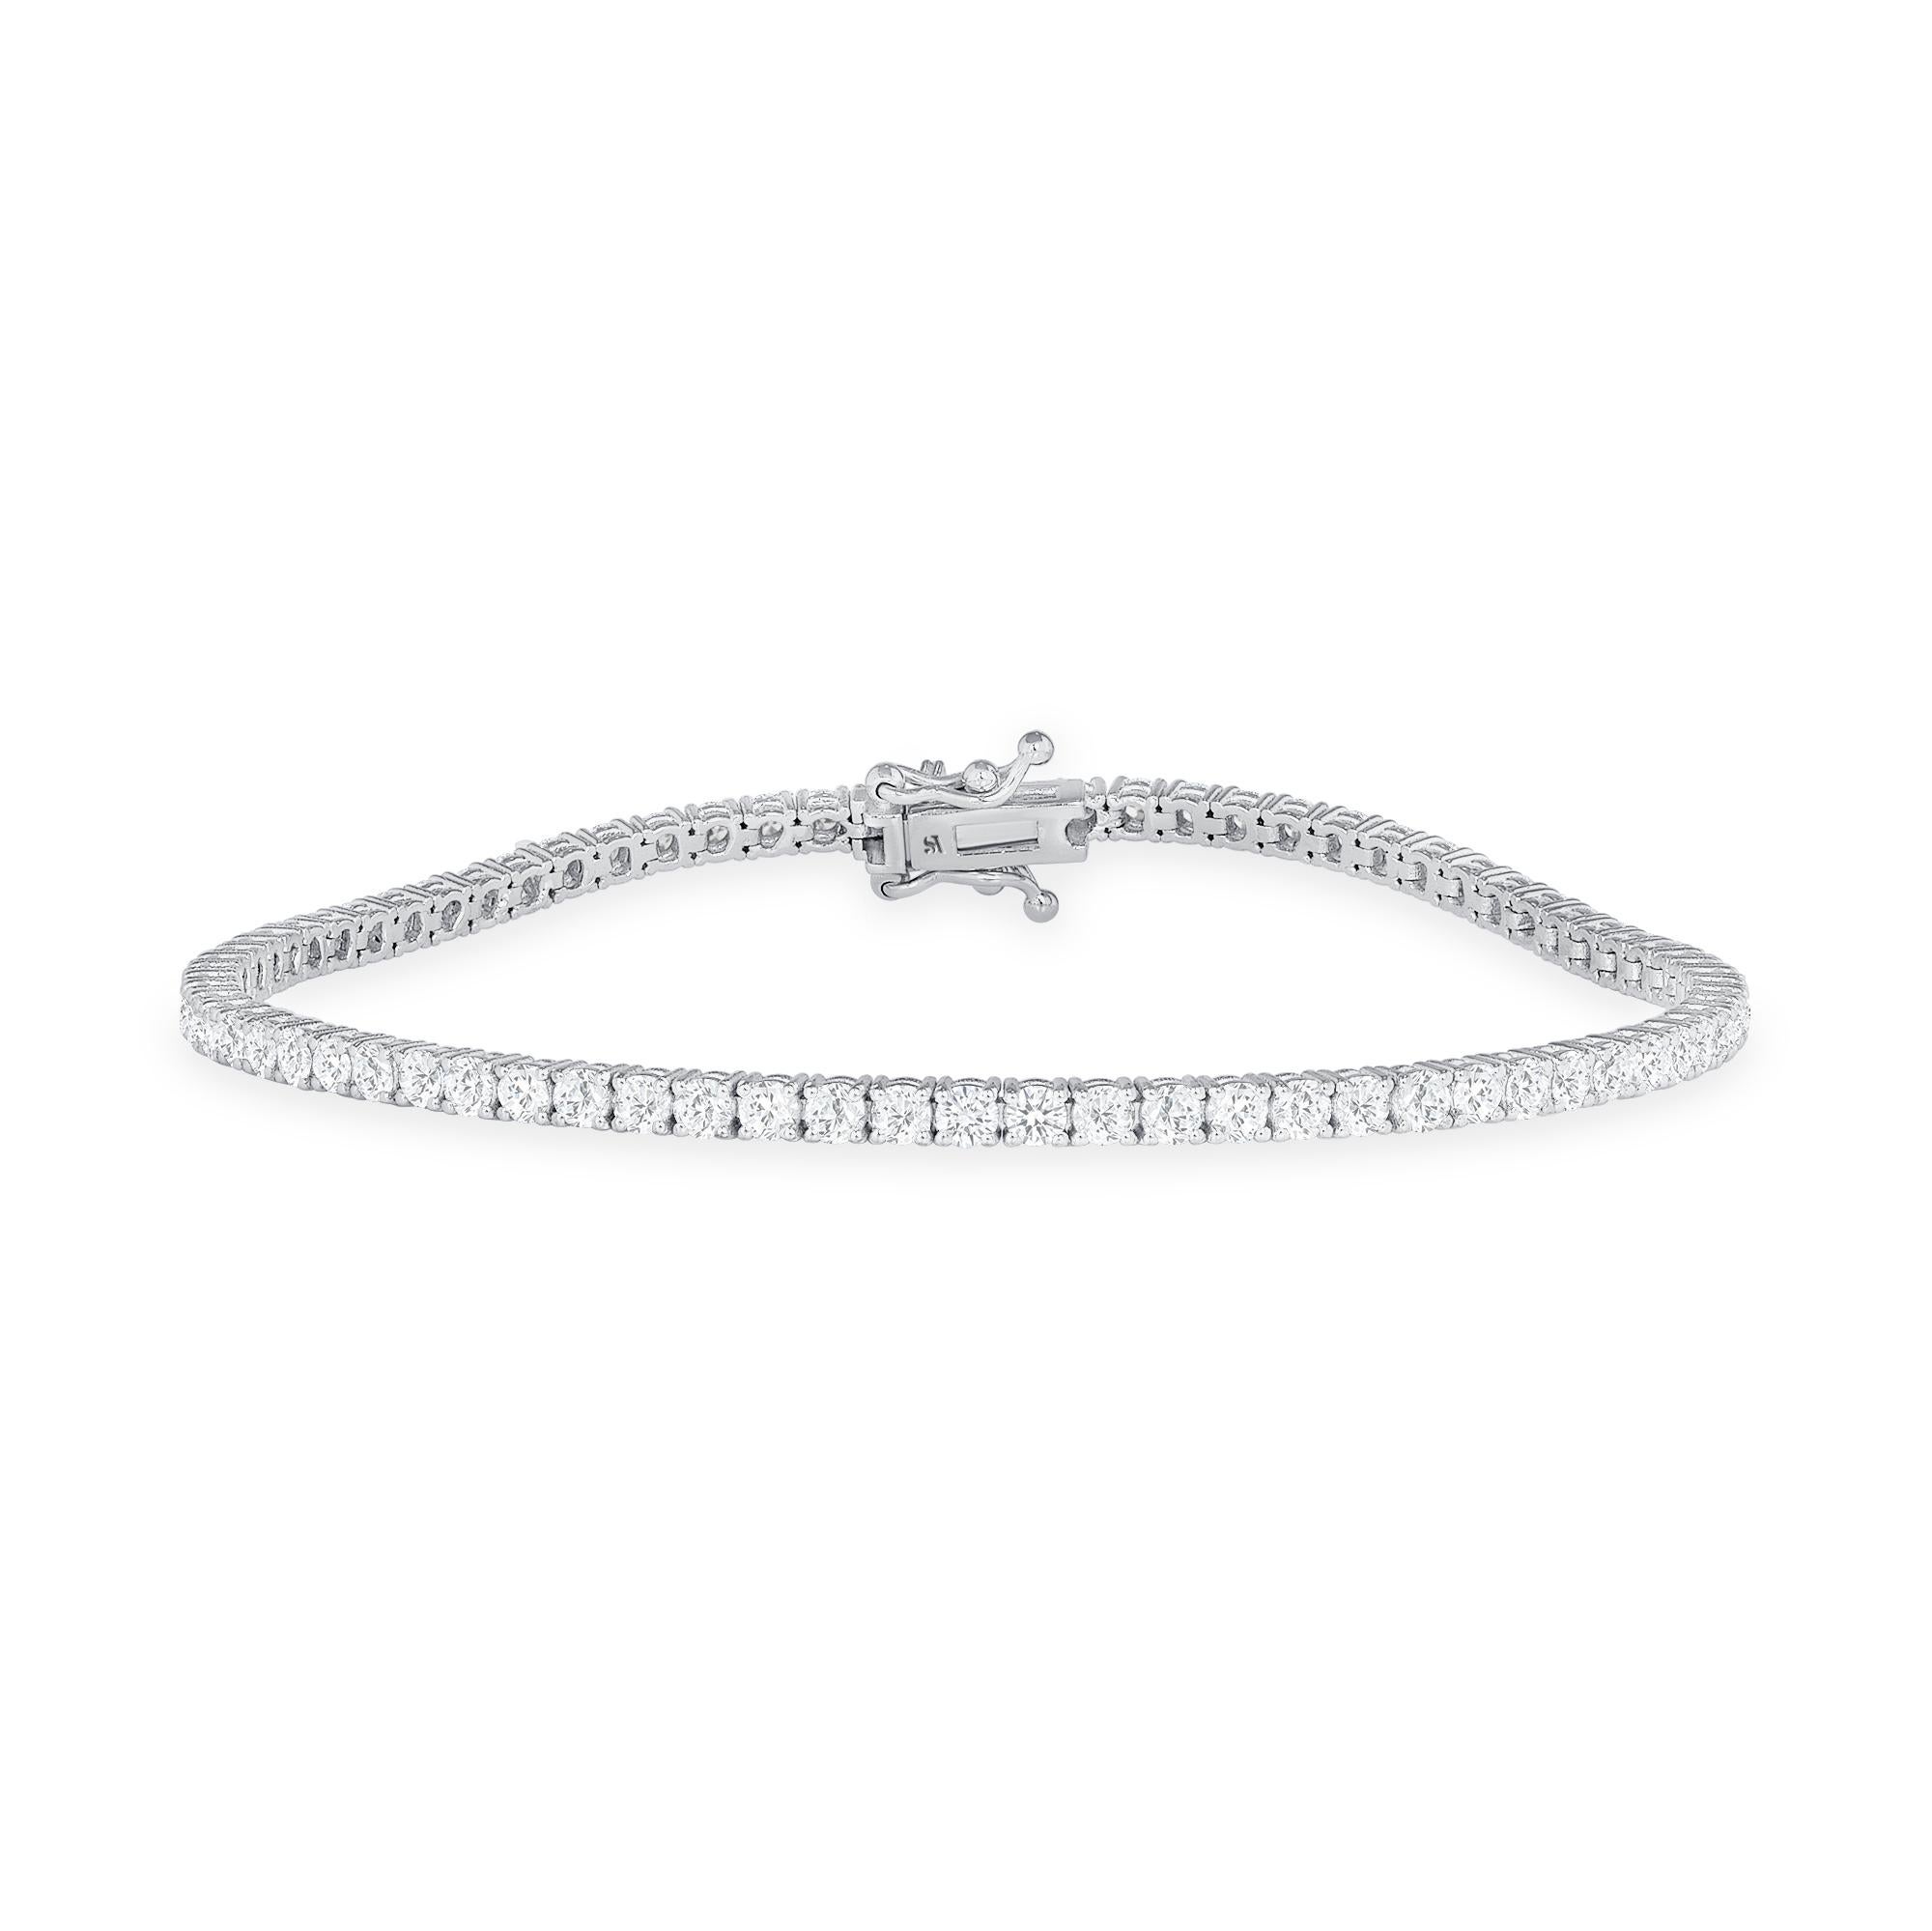 4.10 tcw 14K White Gold Natural Diamond Tennis Bracelet

Wrap your wrist in this stunning tennis bracelets incomparable brilliance from round diamonds. Set in 14K solid gold, this beautiful natural diamond bracelet features a secure double clasp so